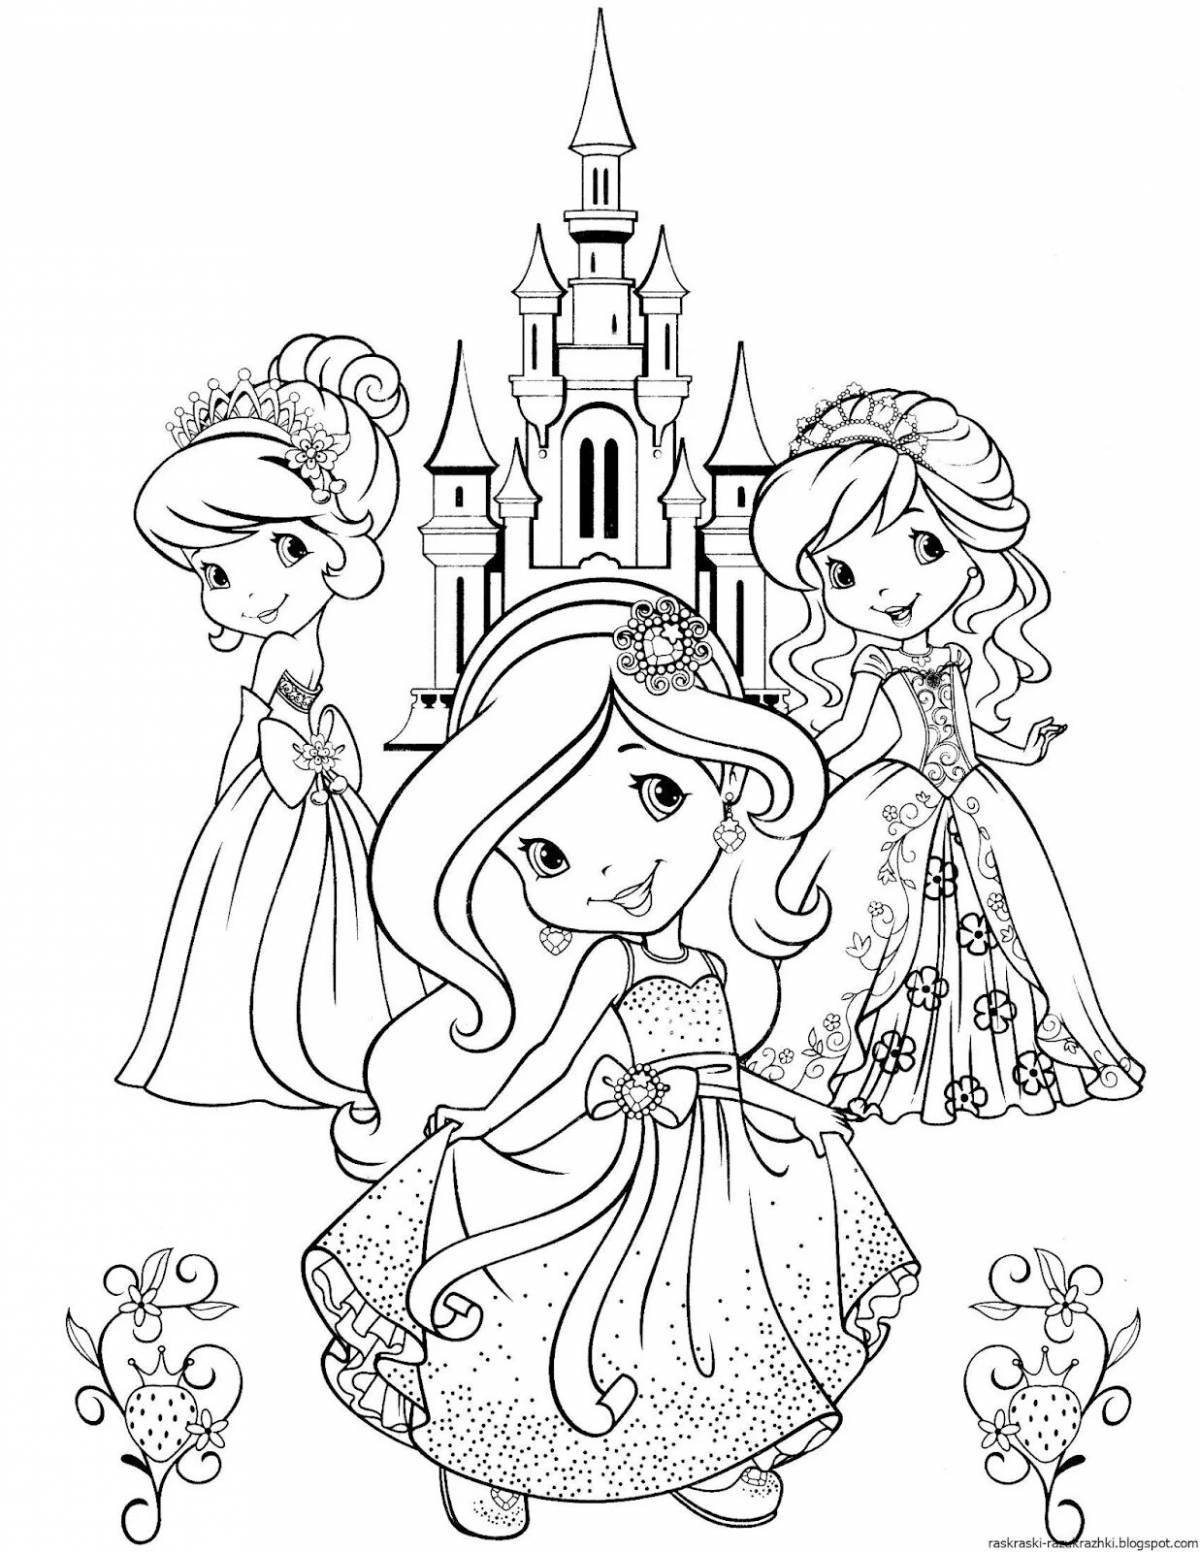 Adorable princess coloring pages for girls 6 years old